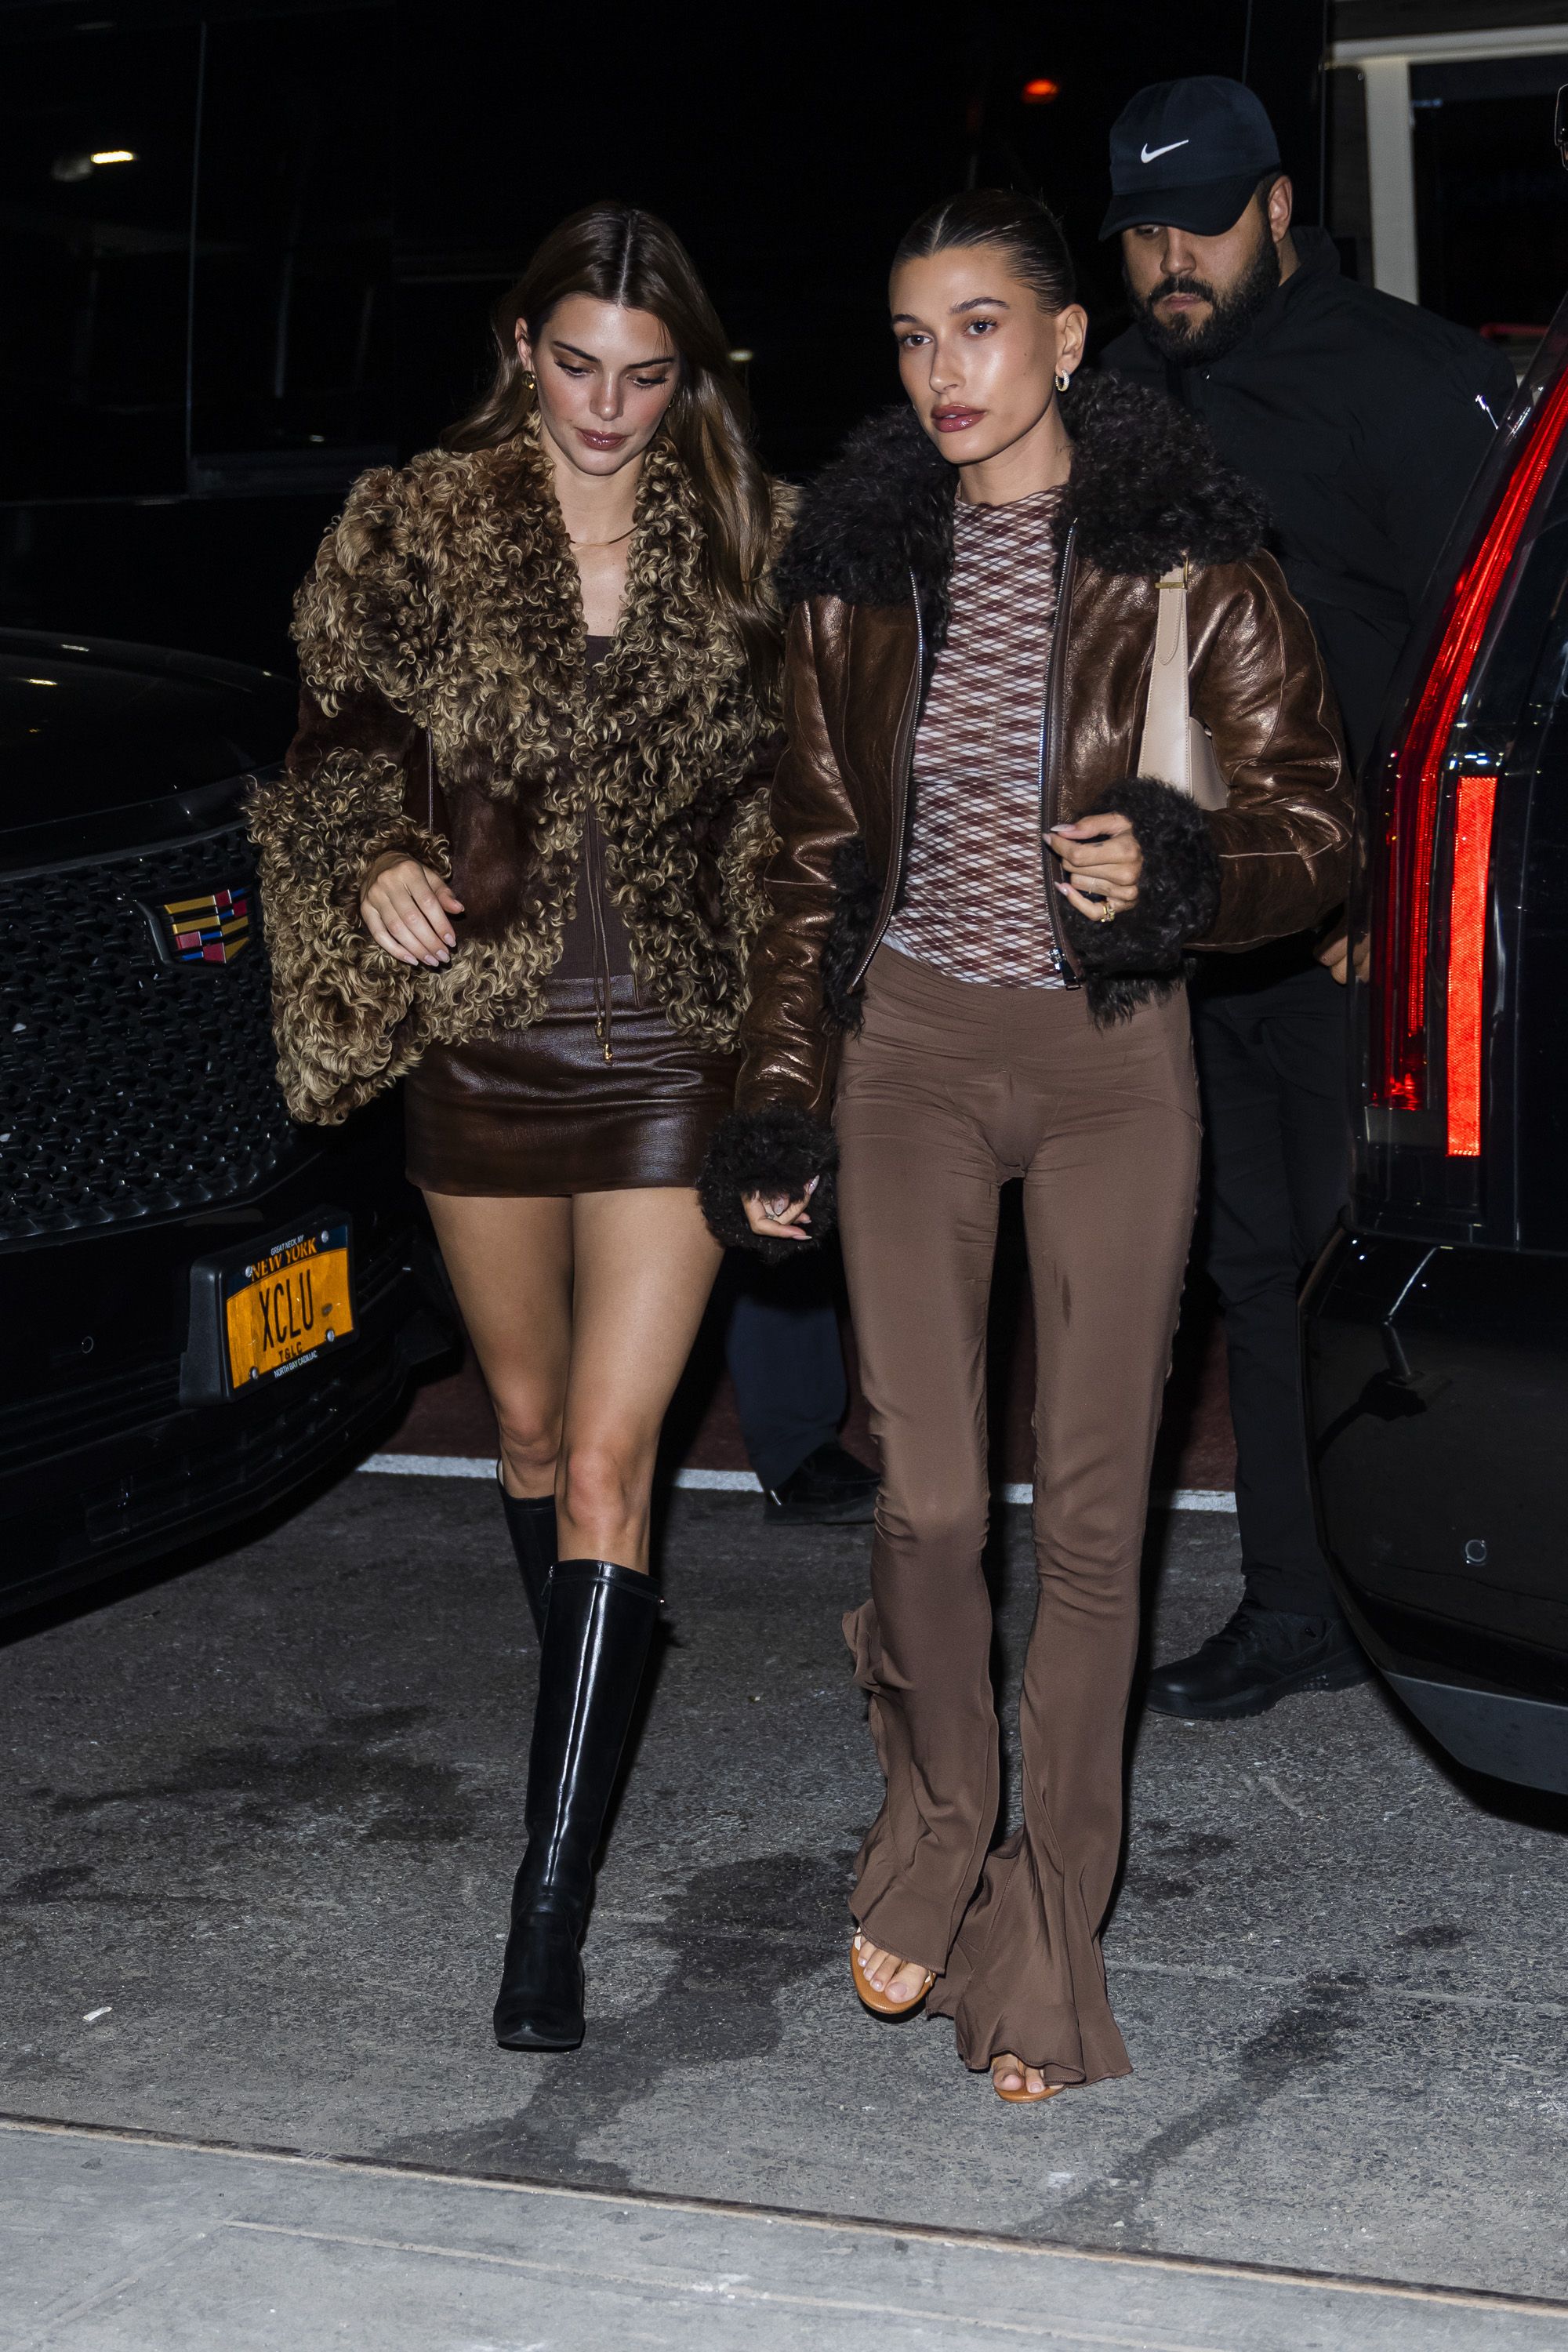 Hailey Bieber & Kendall Jenner Head to Pilates in Two Takes on Leather